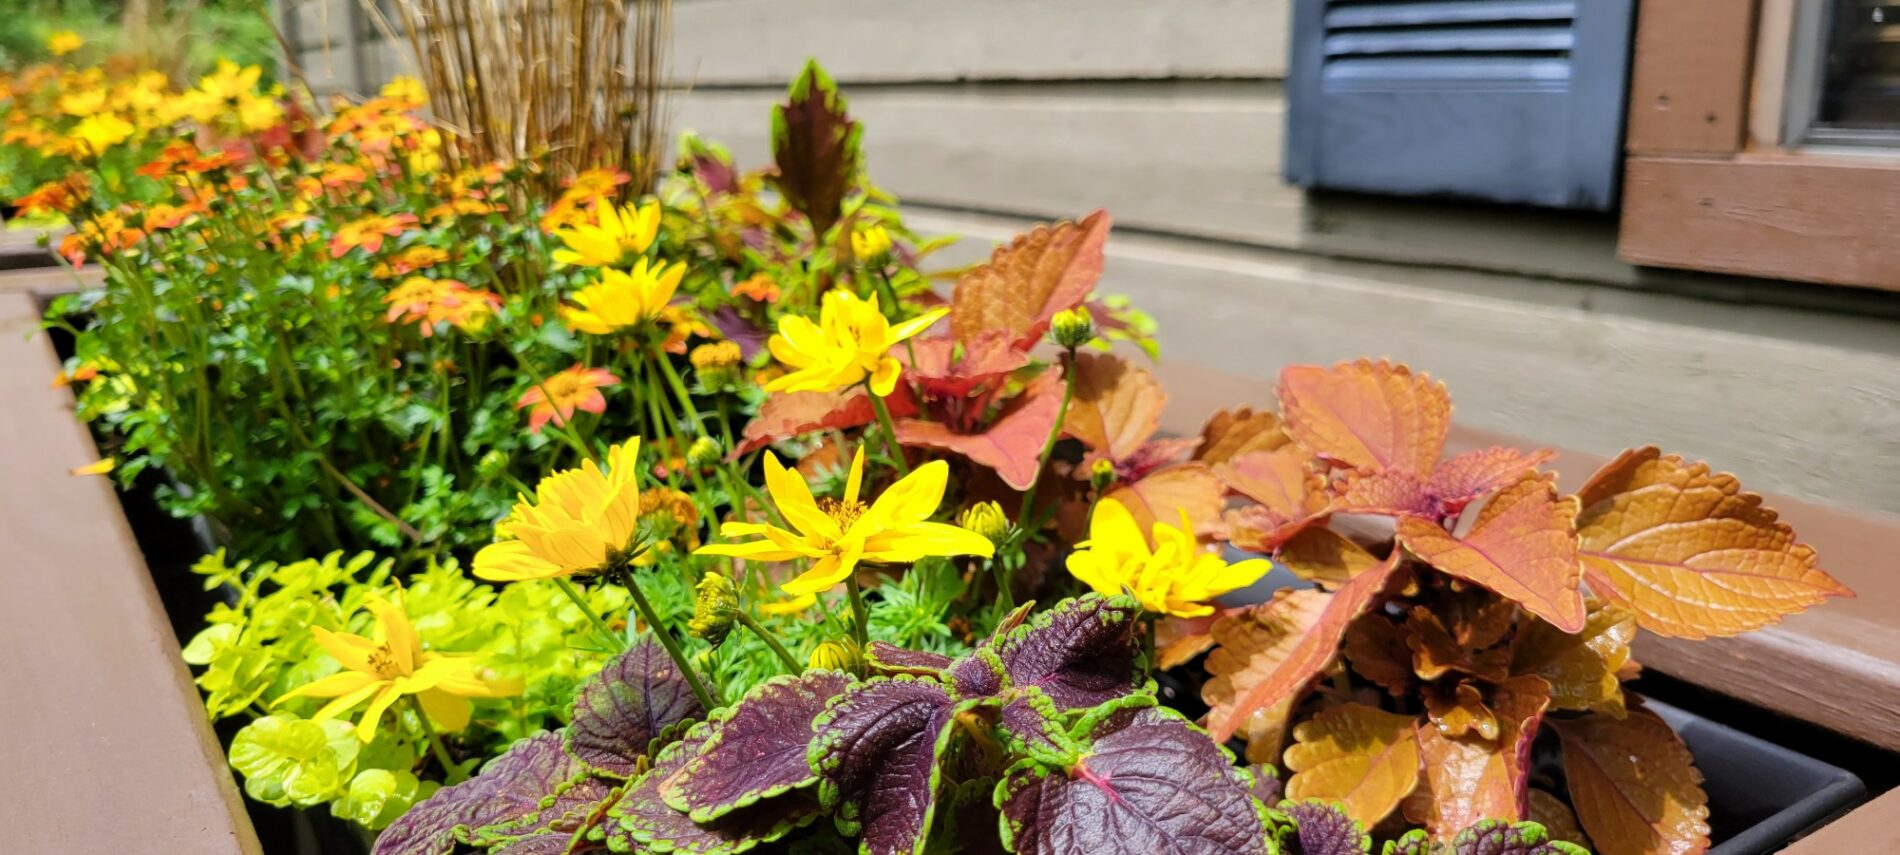 Closeup of brightly colored flowers and plants in flower containers along a small house